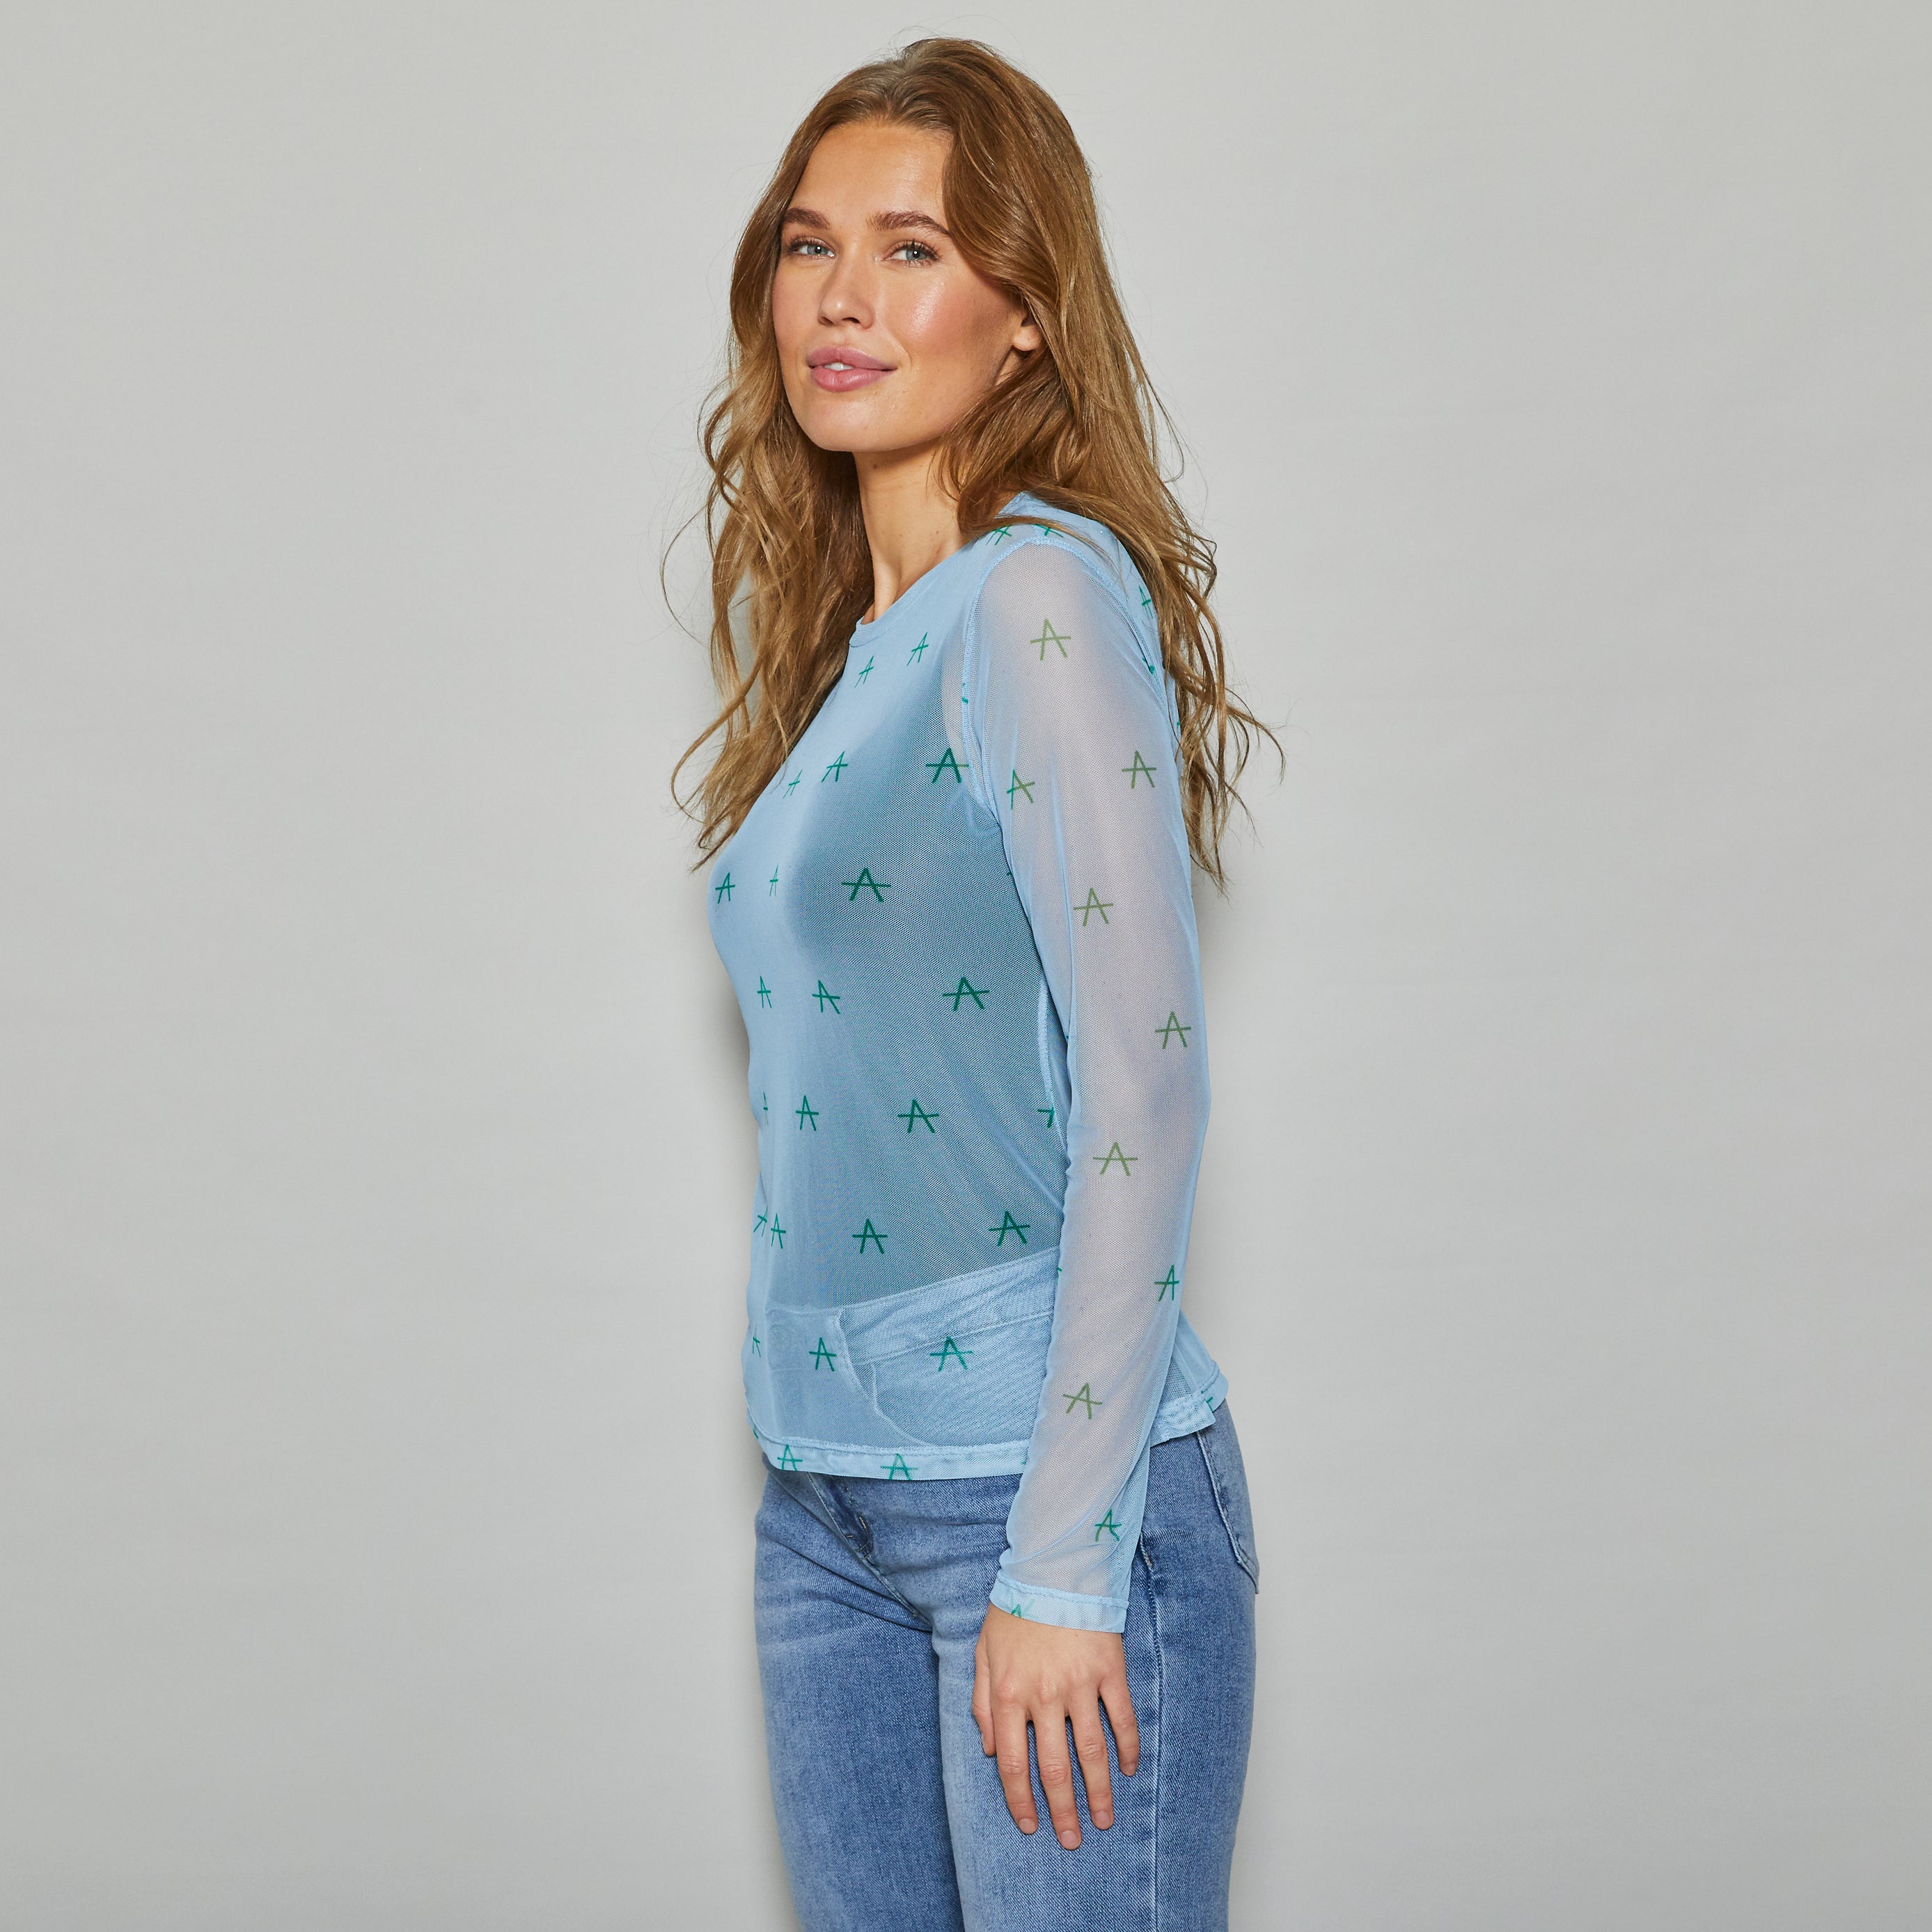 ALLWEEK Fro mesh blouse Blouse Light blue with green A print